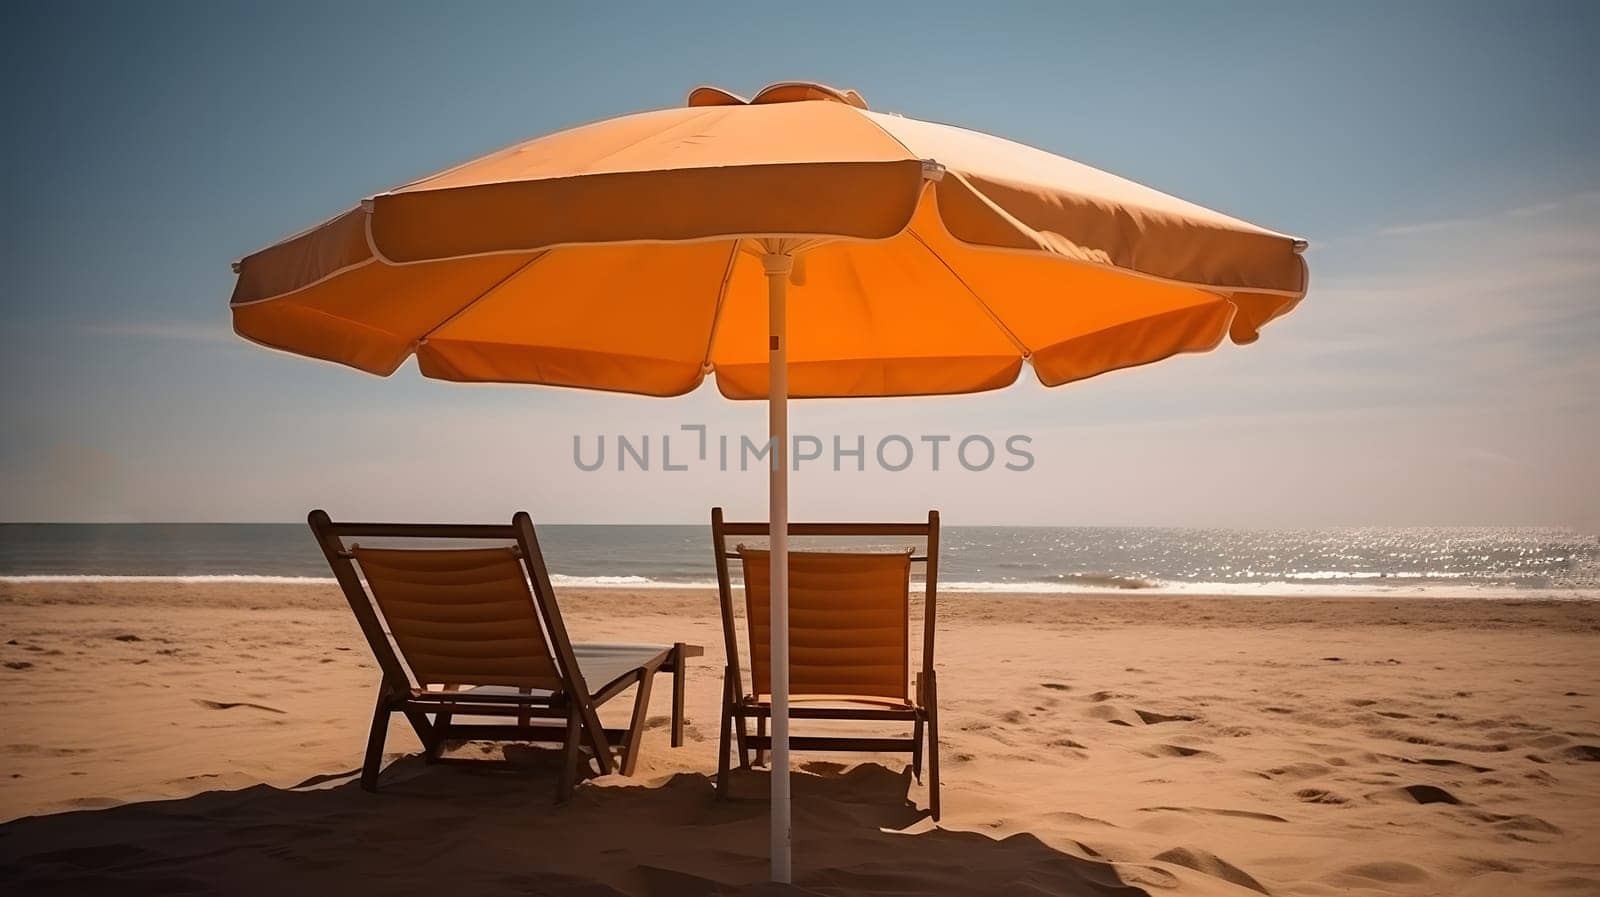 Orange beach umbrella with chairs on the sand beach - summer vacation theme header, neural network generated art by z1b